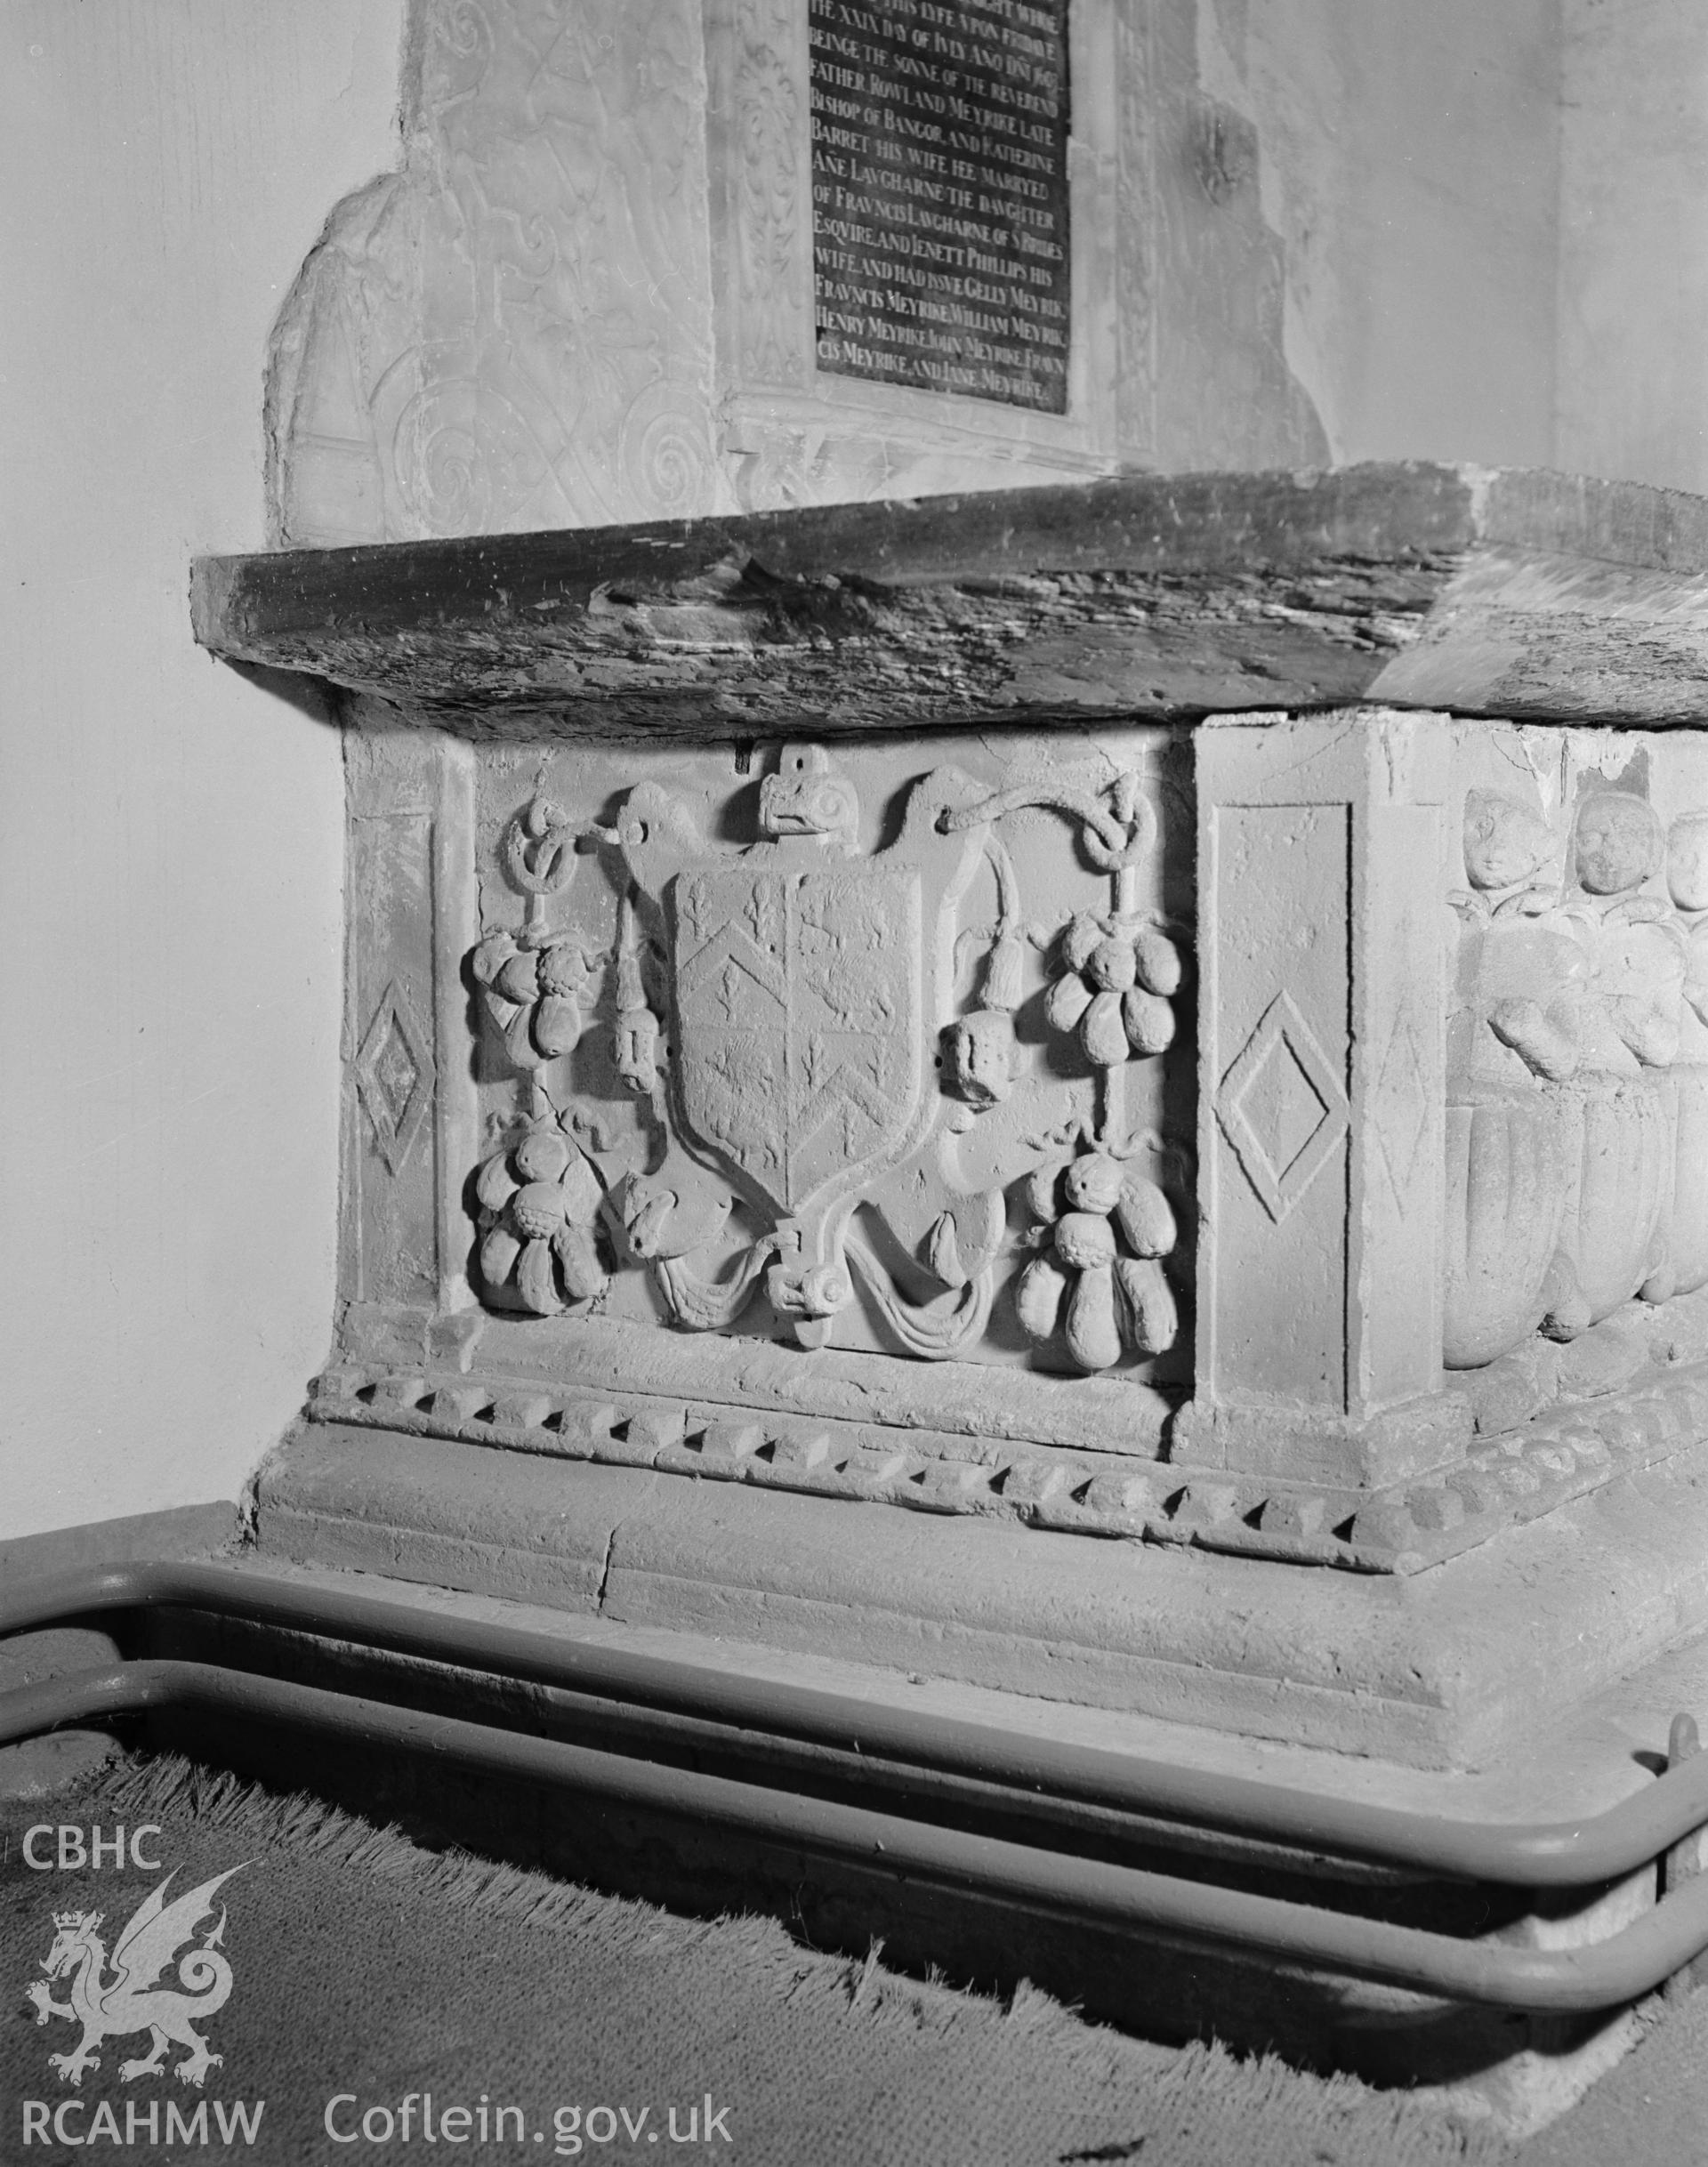 View of monument to Sir Francis Meyrike d.1603 under the tower at Monkton Priory taken in 07.08.1941.